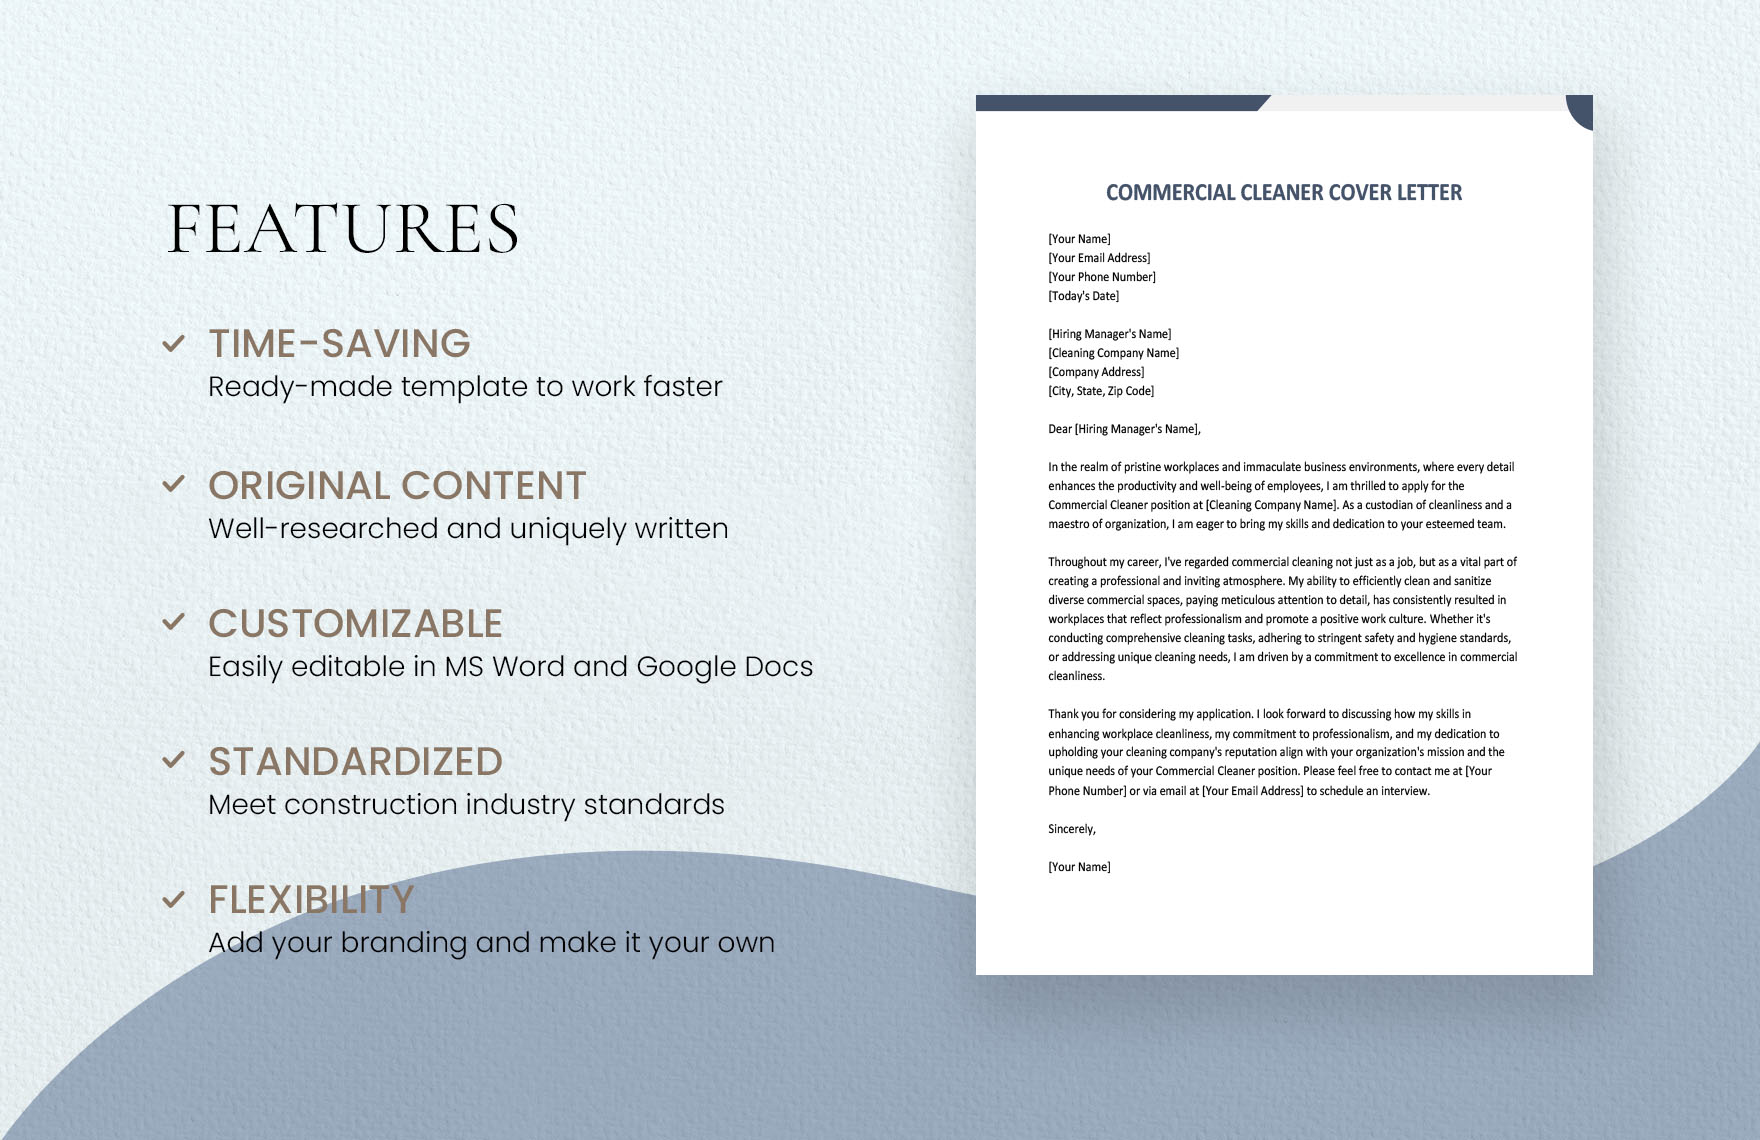 Commercial Cleaner Cover Letter